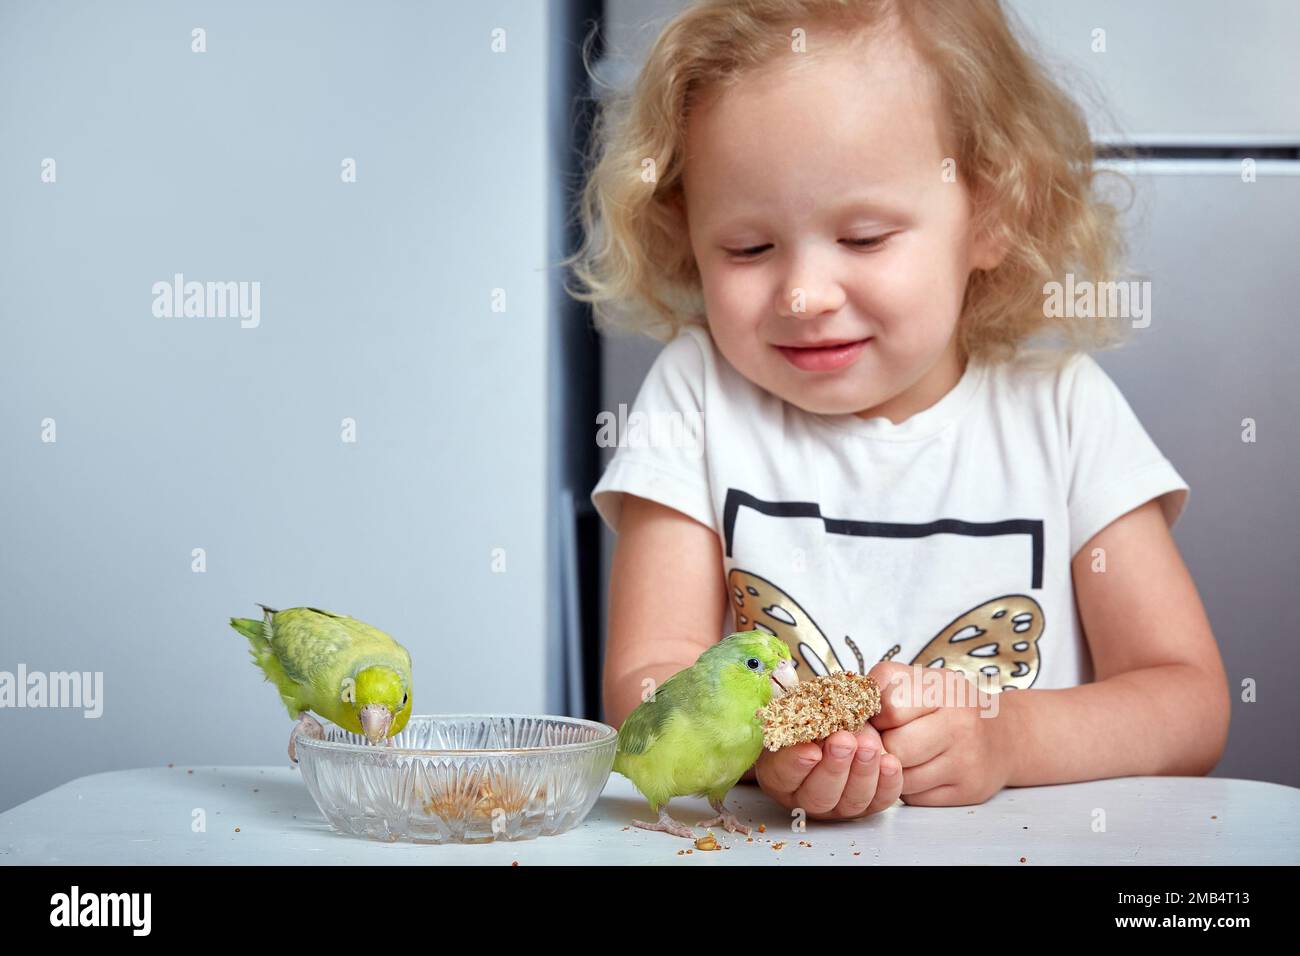 Cute girl feeds two forpus parrots. Exotic pets, cute Forpus parrot bird with millet spray feed, Forpus parrot is now famous tiny bird pet in Thailand Stock Photo